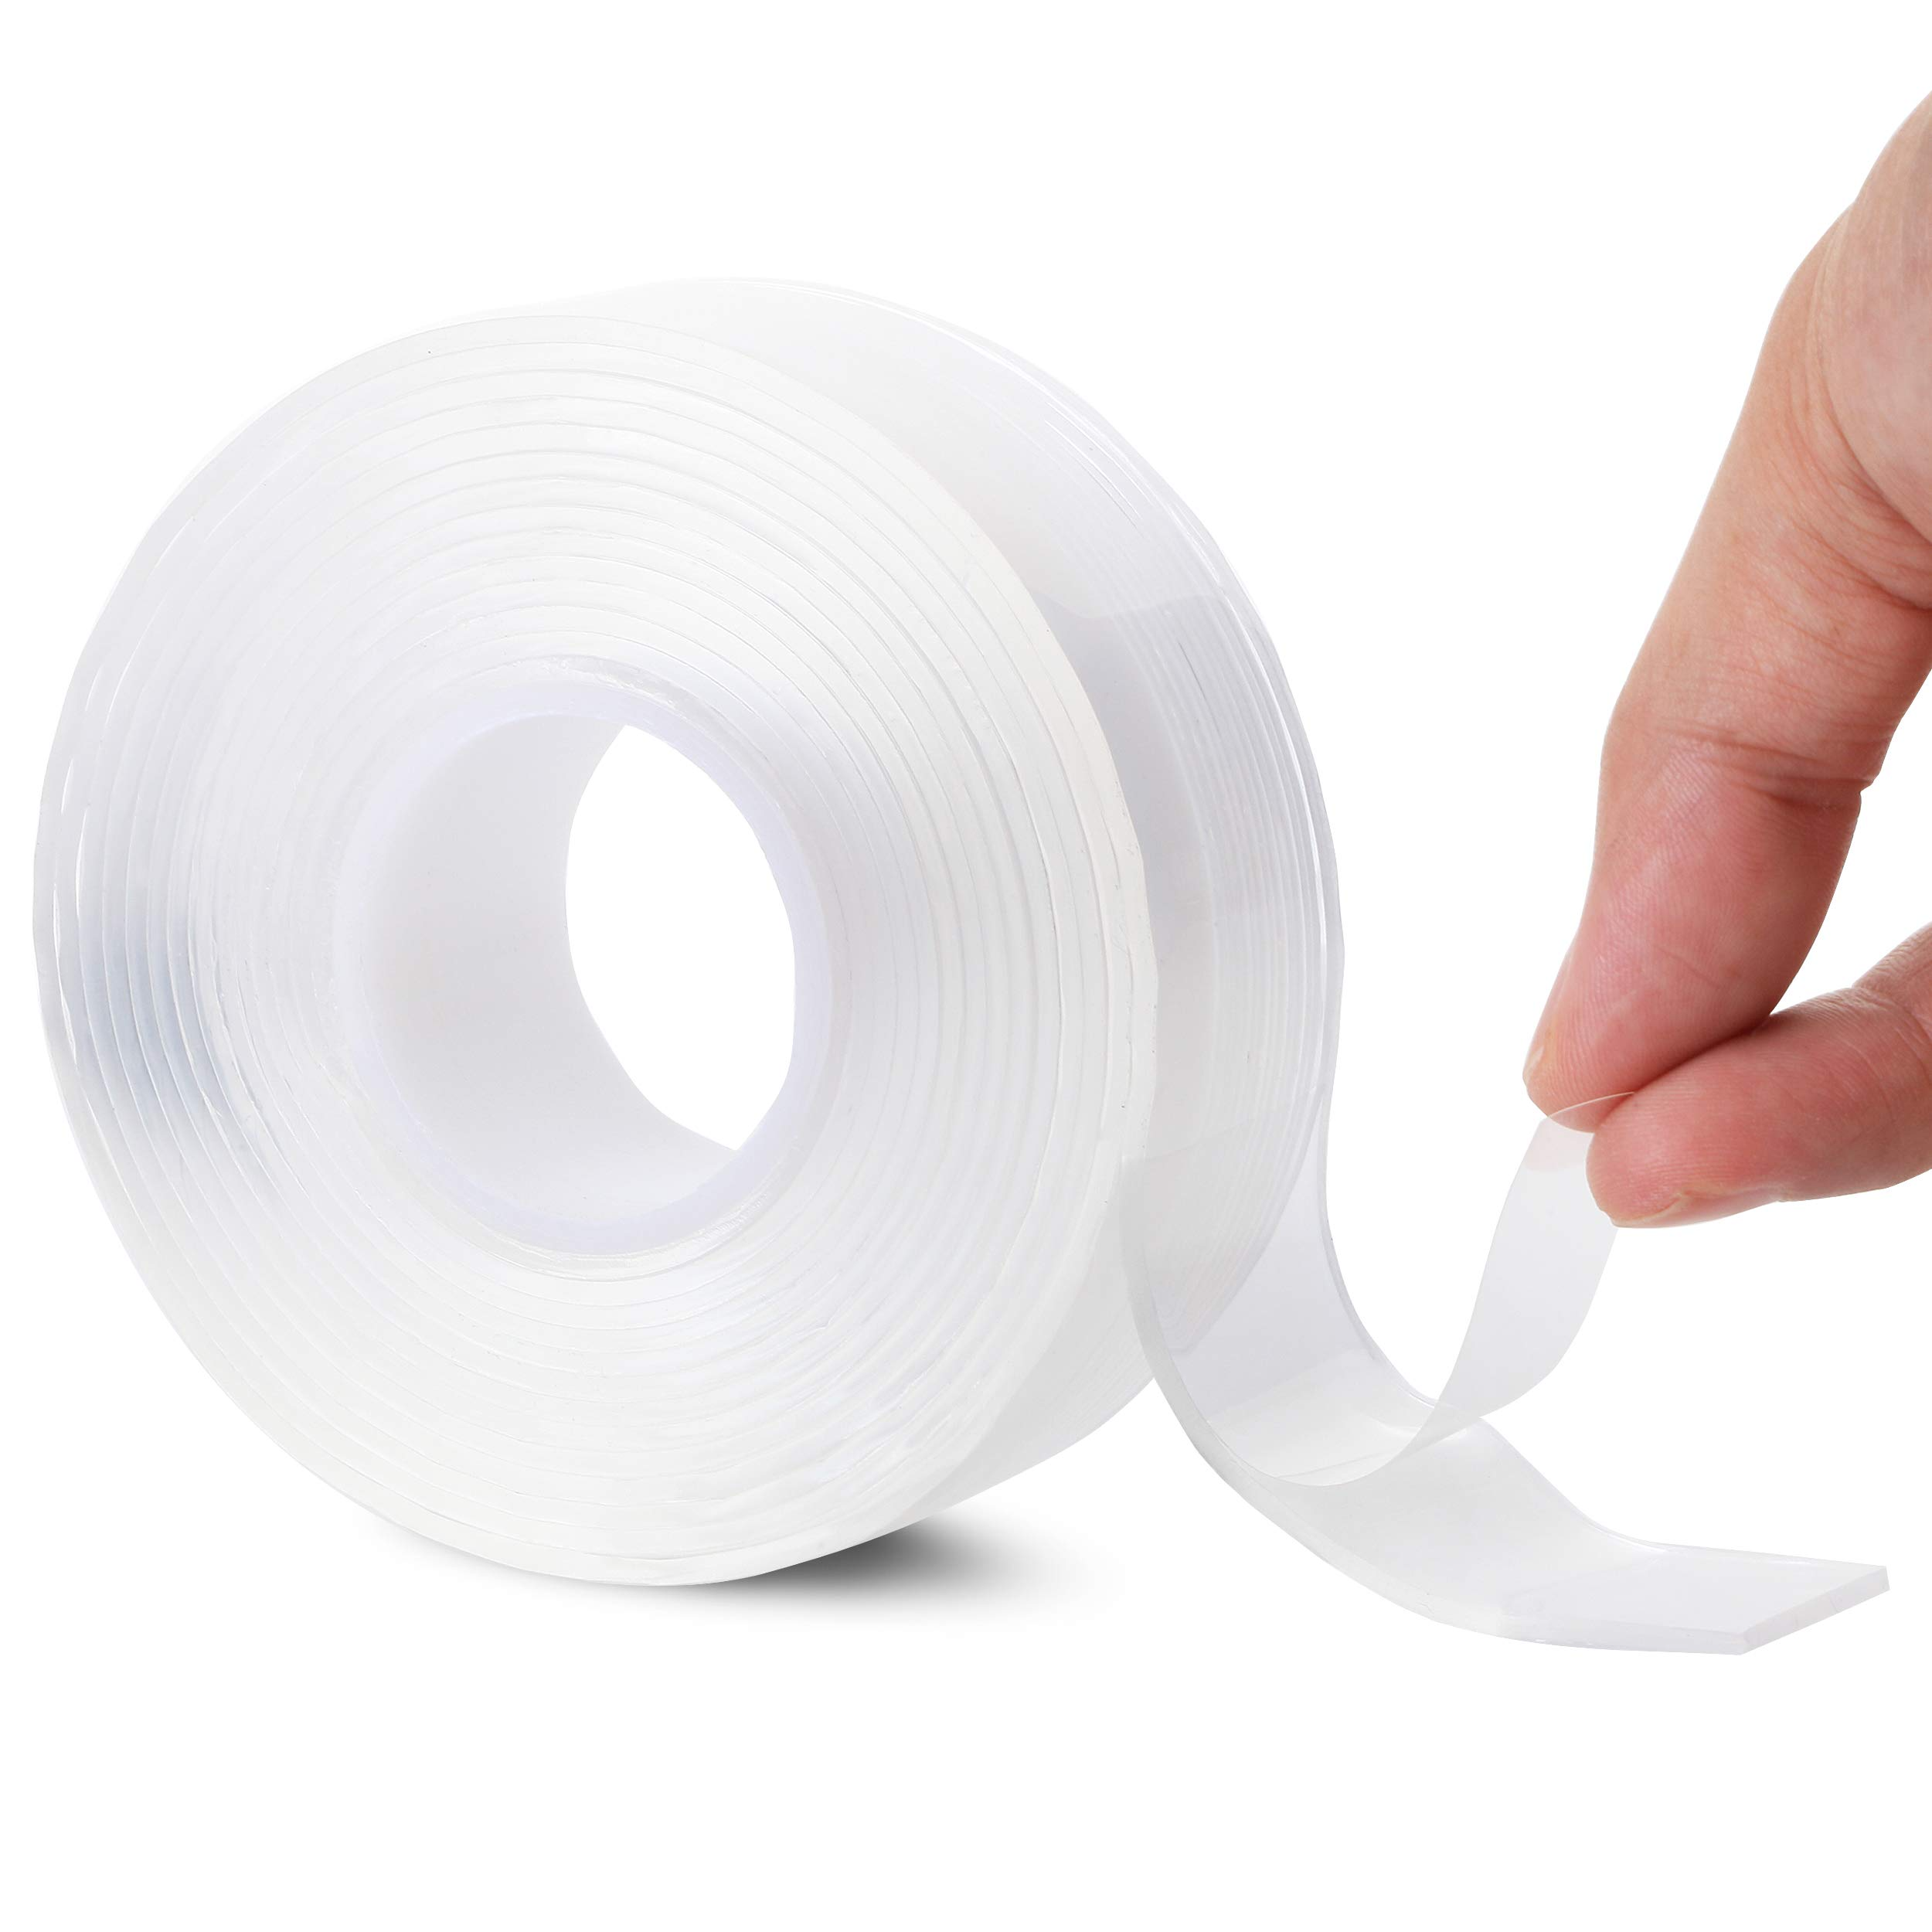 1M2M5M-130mm-Nano-Tape-Double-sided-Tape-Transparent-No-Trail-Reusable-Waterproof-Tape-Can-Clean-Hou-1813654-2